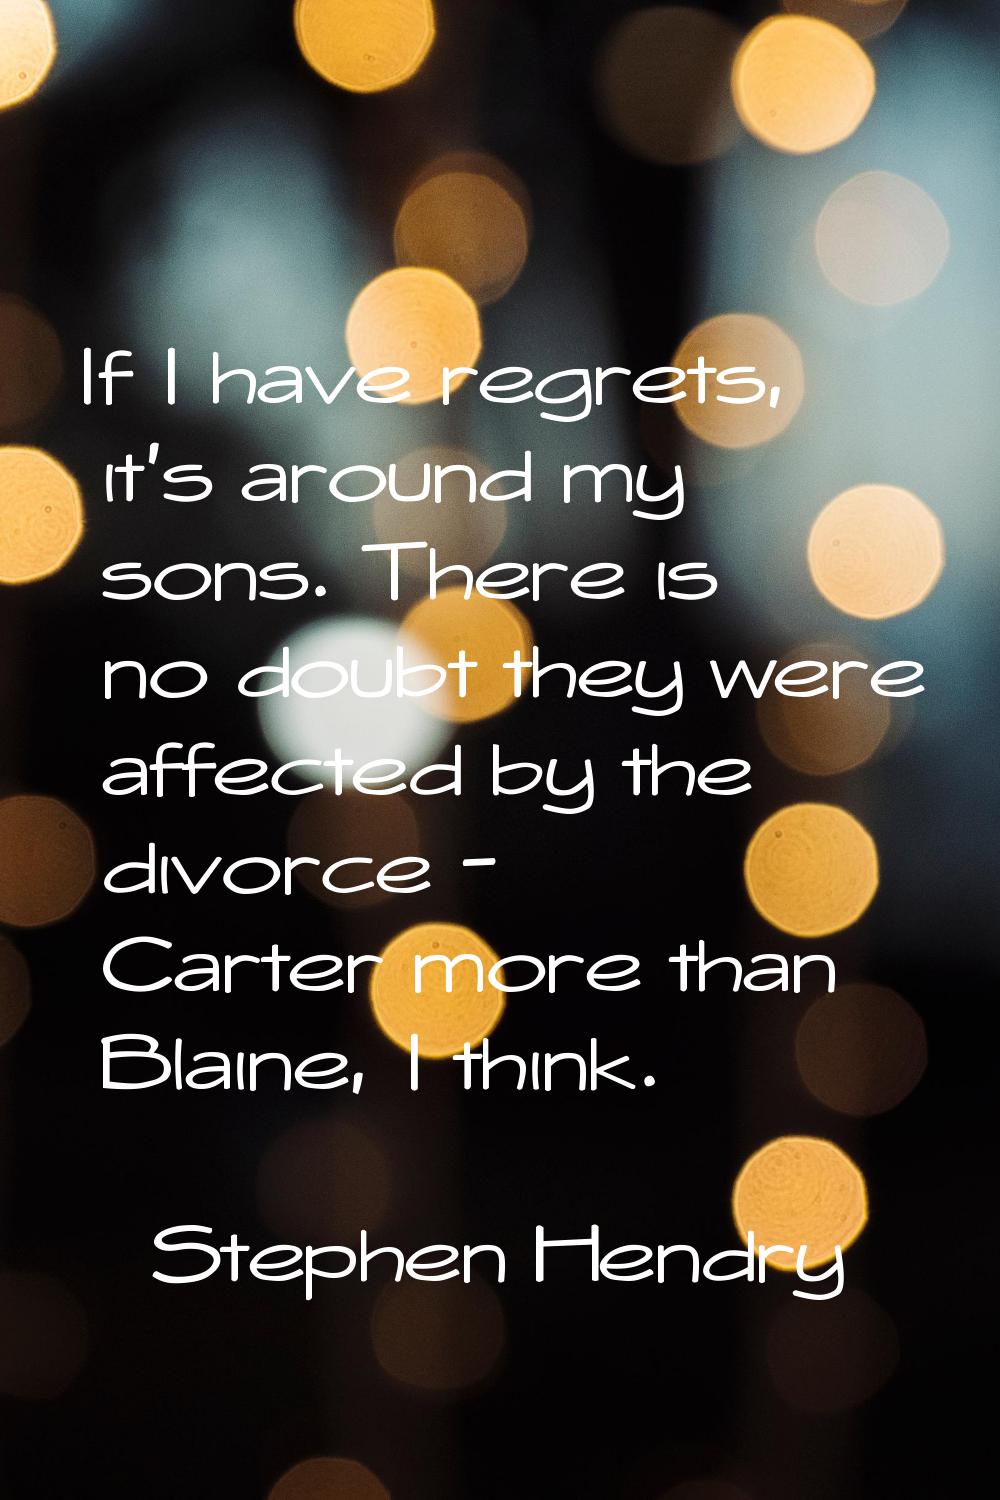 If I have regrets, it's around my sons. There is no doubt they were affected by the divorce - Carte